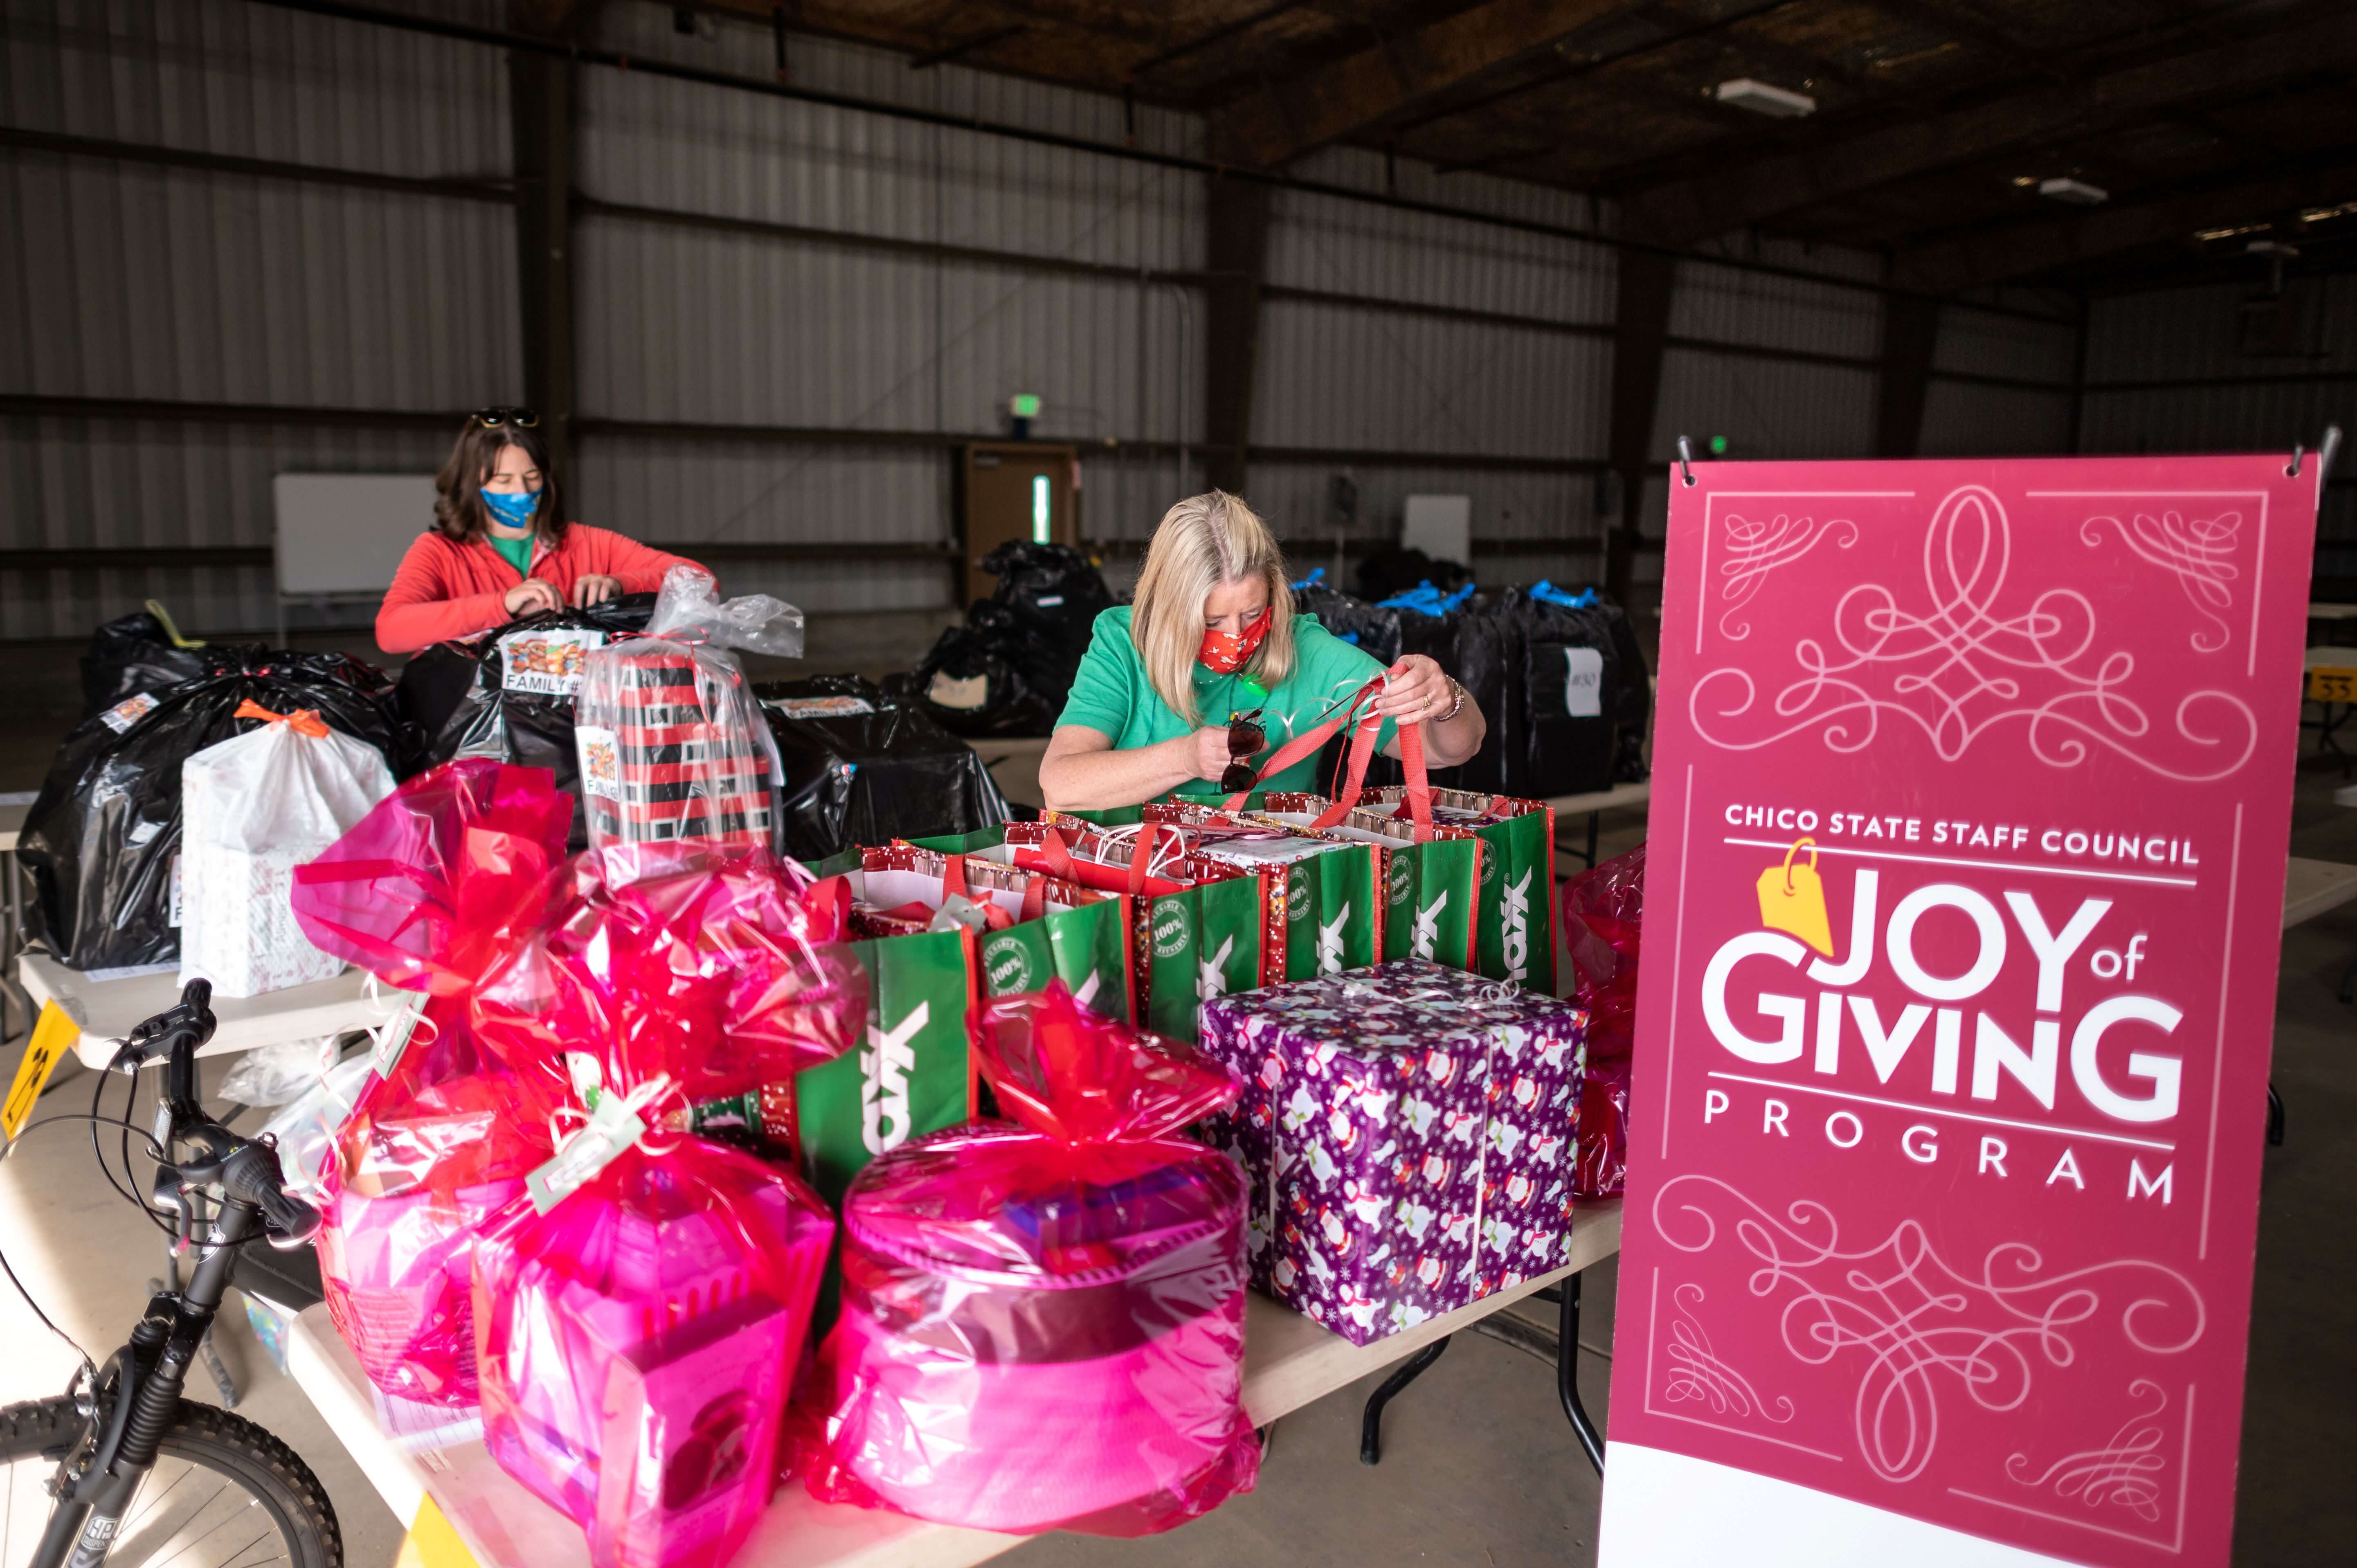 Staff Council members sort donated gifts for Chico State's 2020 Joy of Giving program.